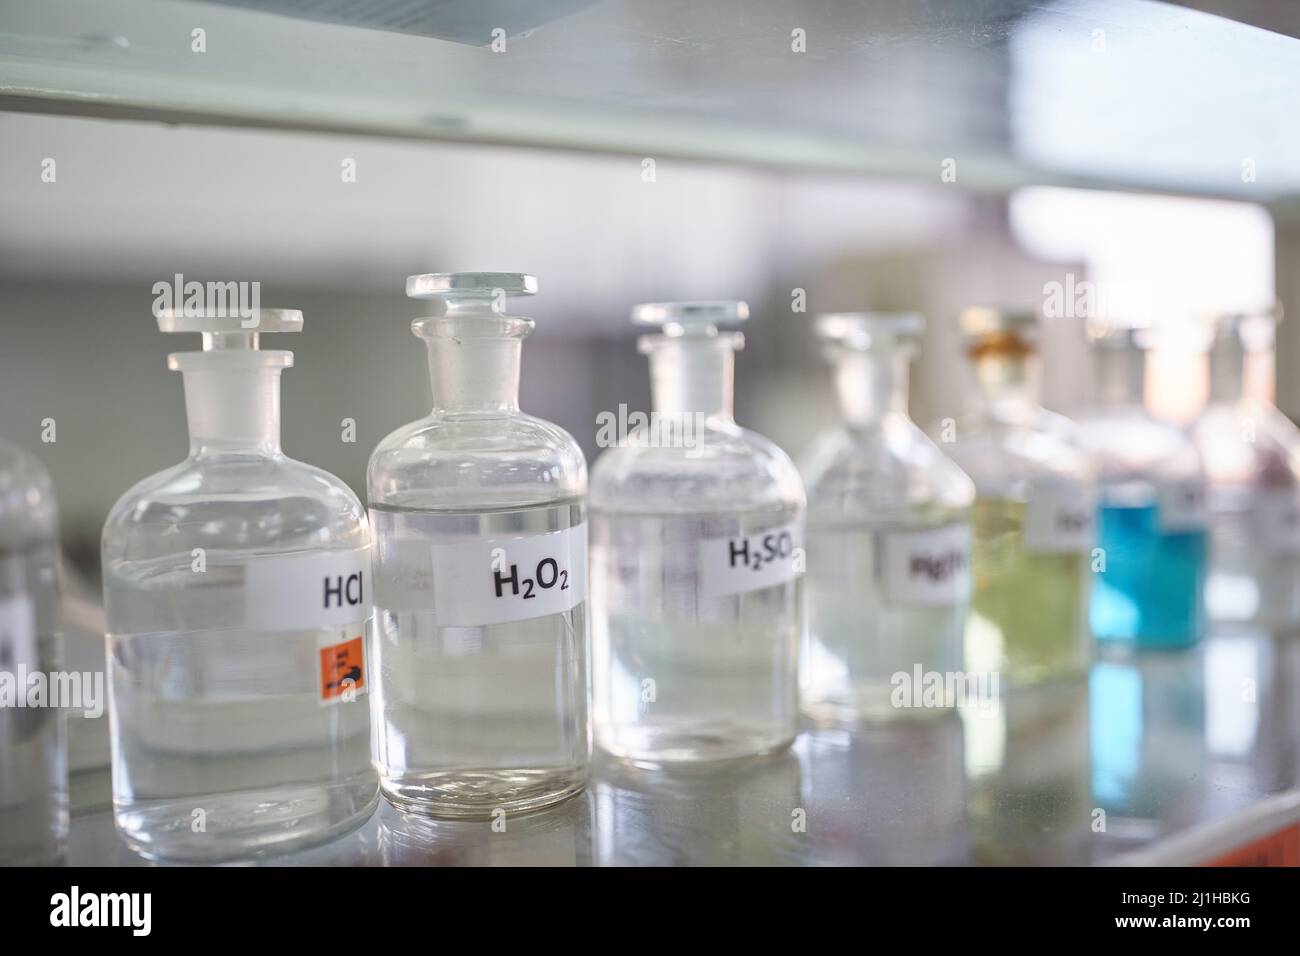 Chemical containers on the shelf in a sterile environment of the laboratory. Chemistry, lab, chemicals Stock Photo